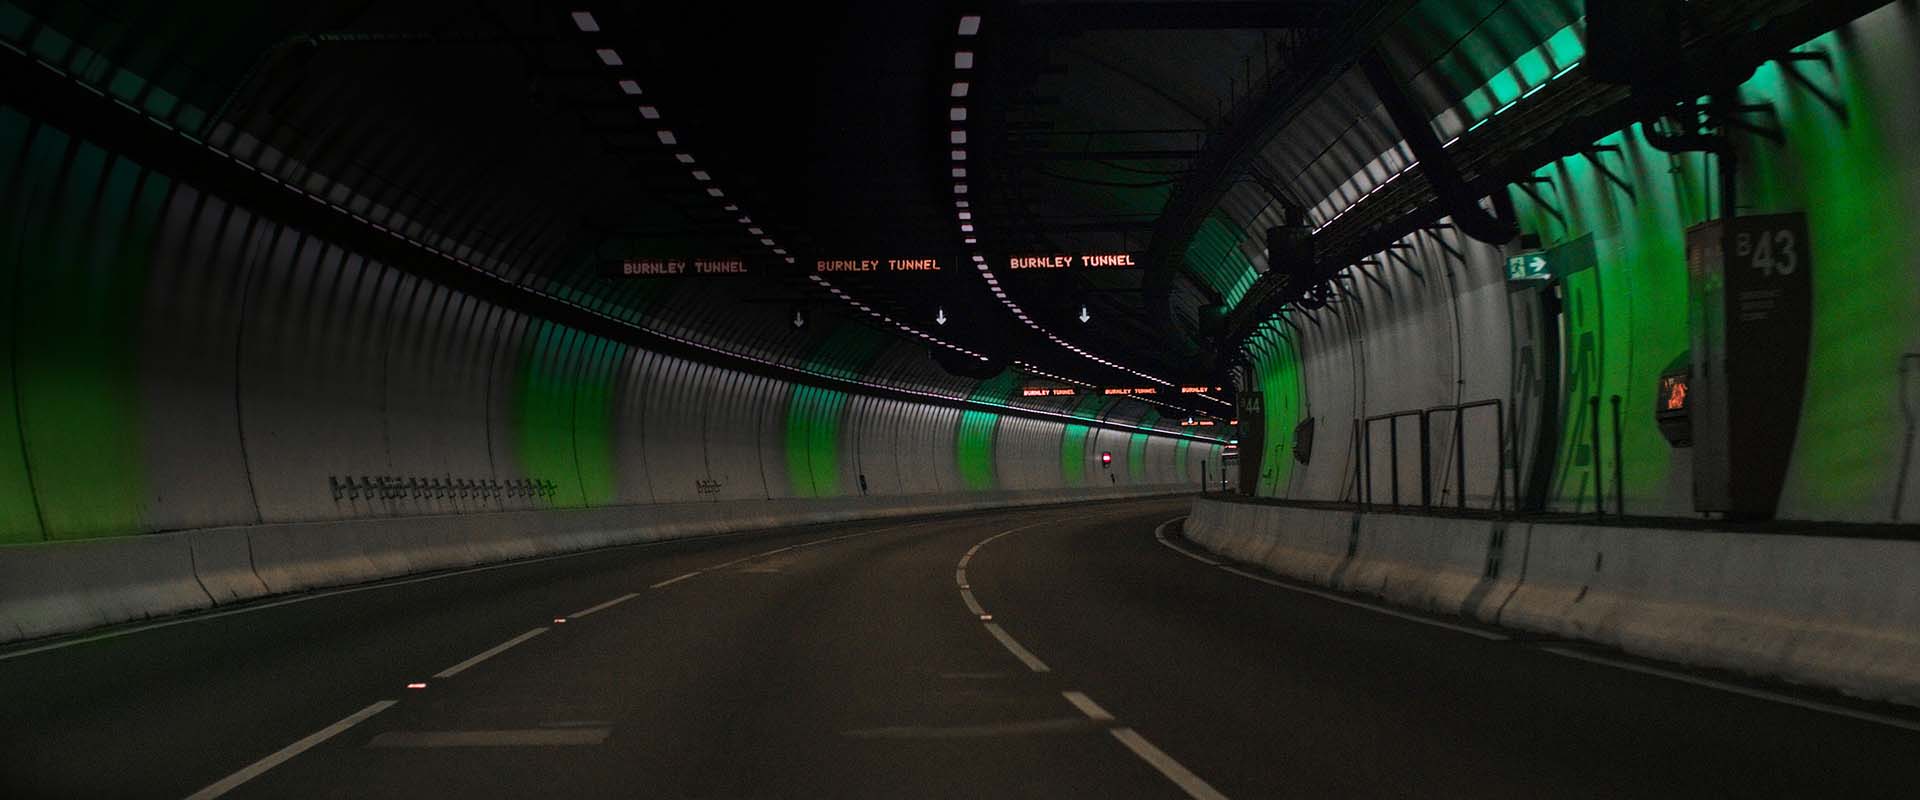 Burnley Tunnel Pacemaker Lighting